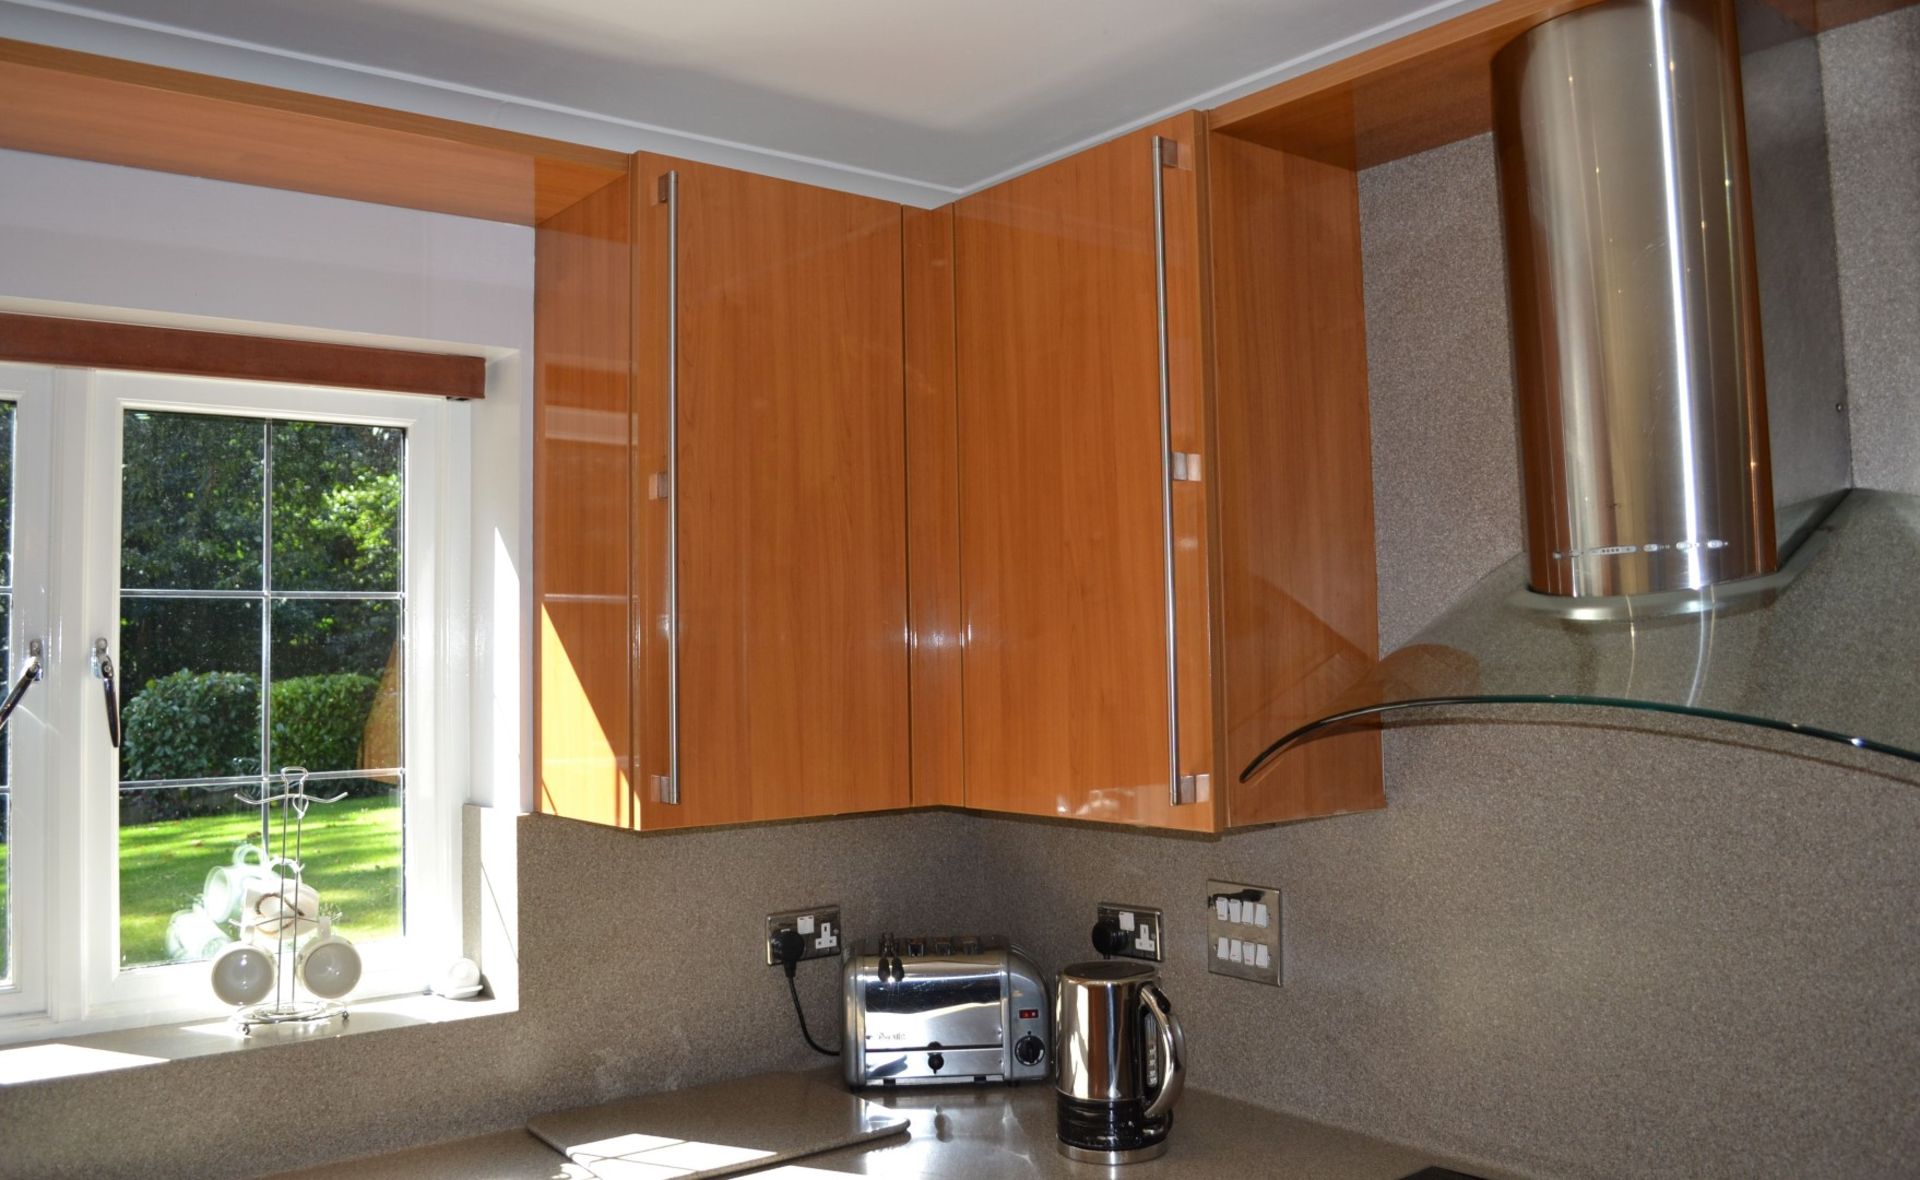 1 x Bespoke Siematic Gloss Fitted Kitchen With Corian Worktops, Frosted Glass Breakfast Bar - NO VAT - Image 38 of 91